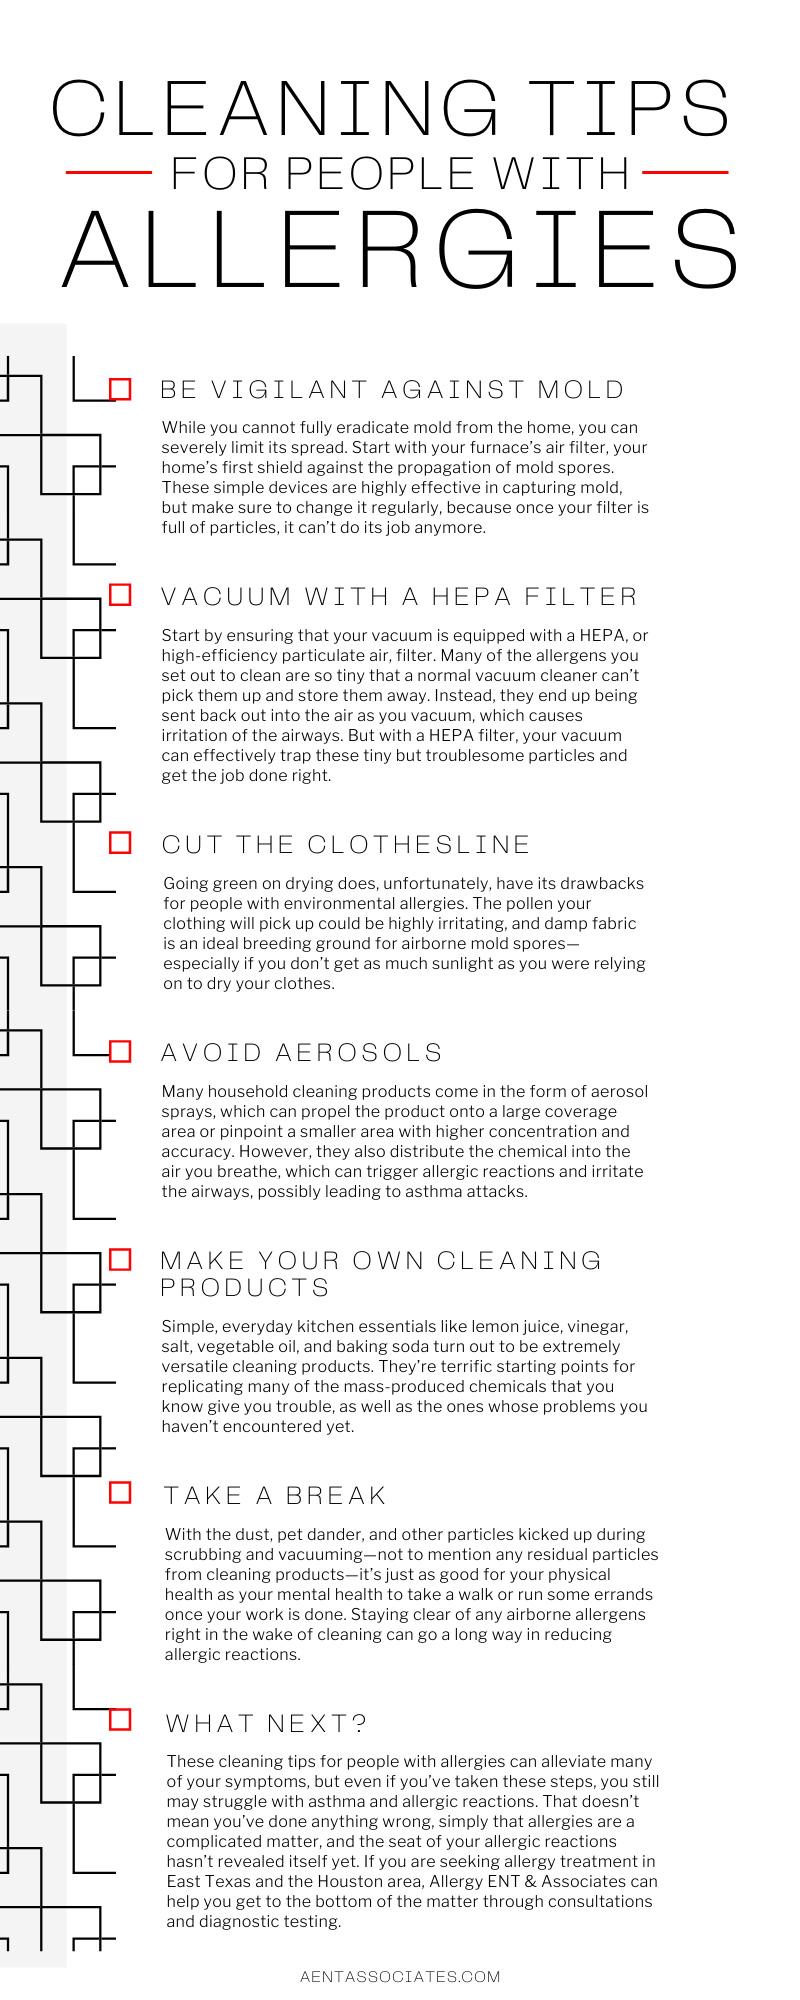 Cleaning Tips for People With Allergies